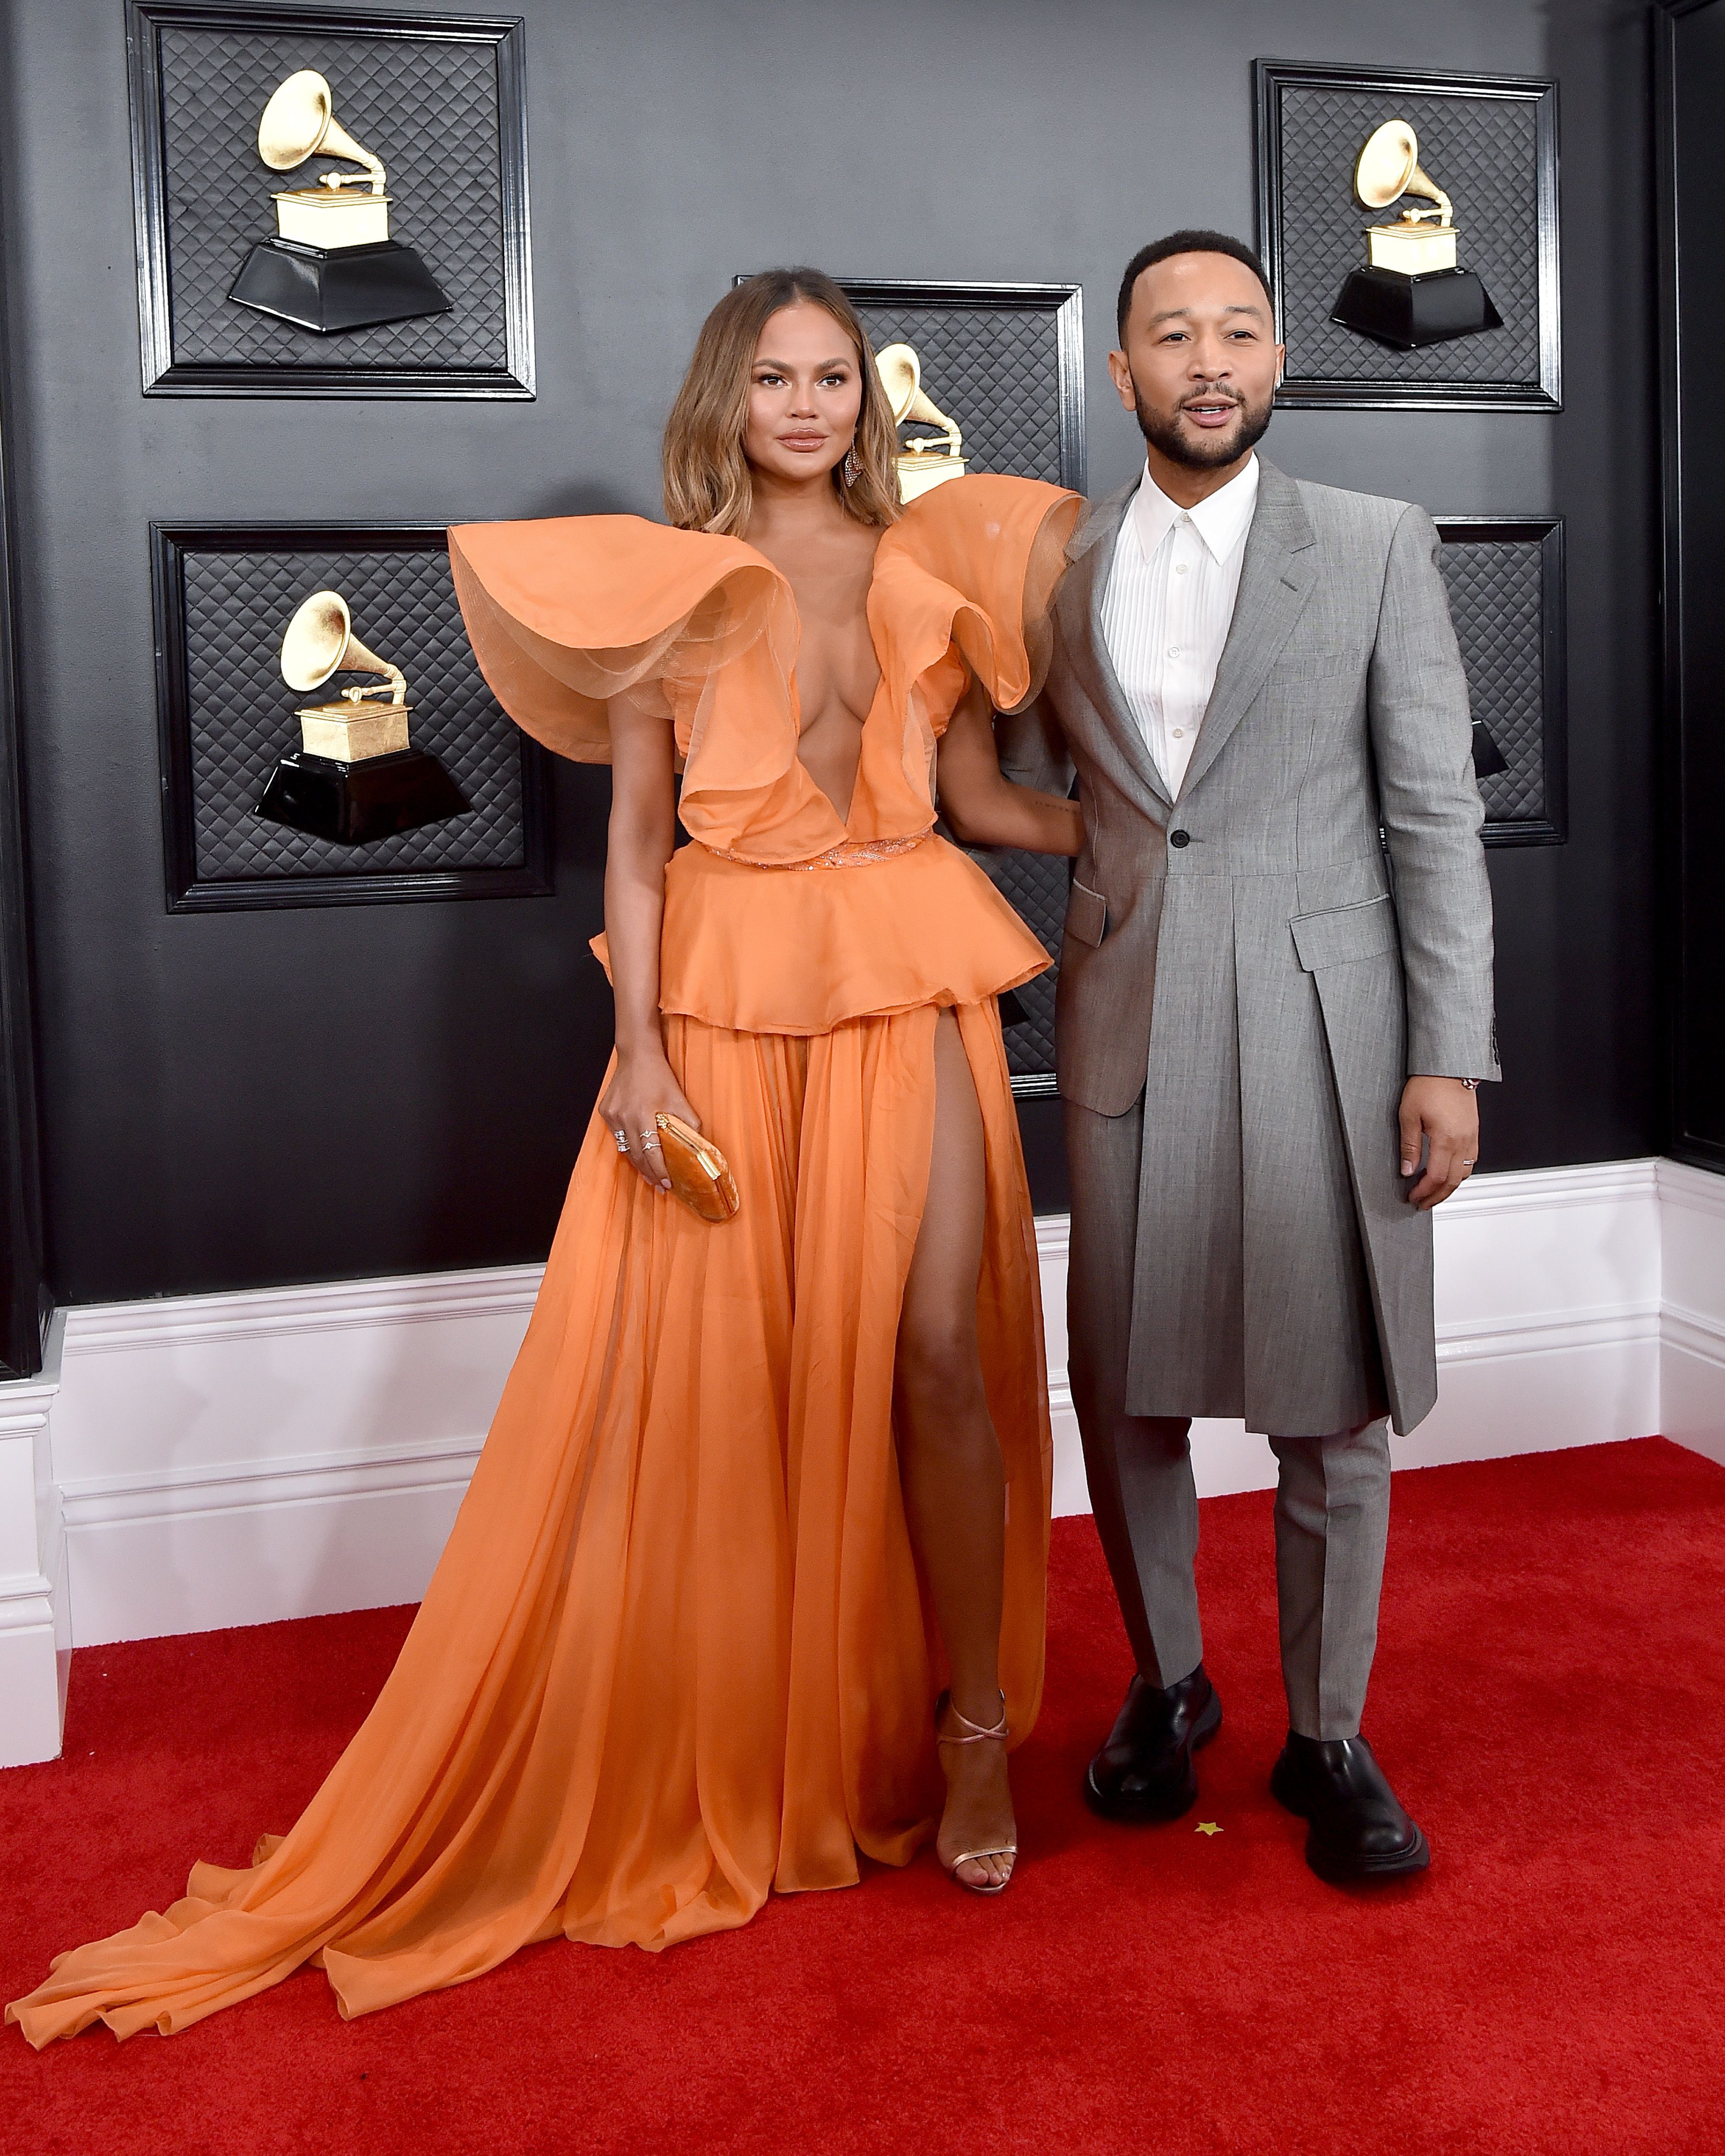 Chrissy Teigen and John Legend walk the red carpet during the 62nd Annual Grammy Awards at Staples Center on January 26, 2020 in Los Angeles, California. | Source: Getty Images